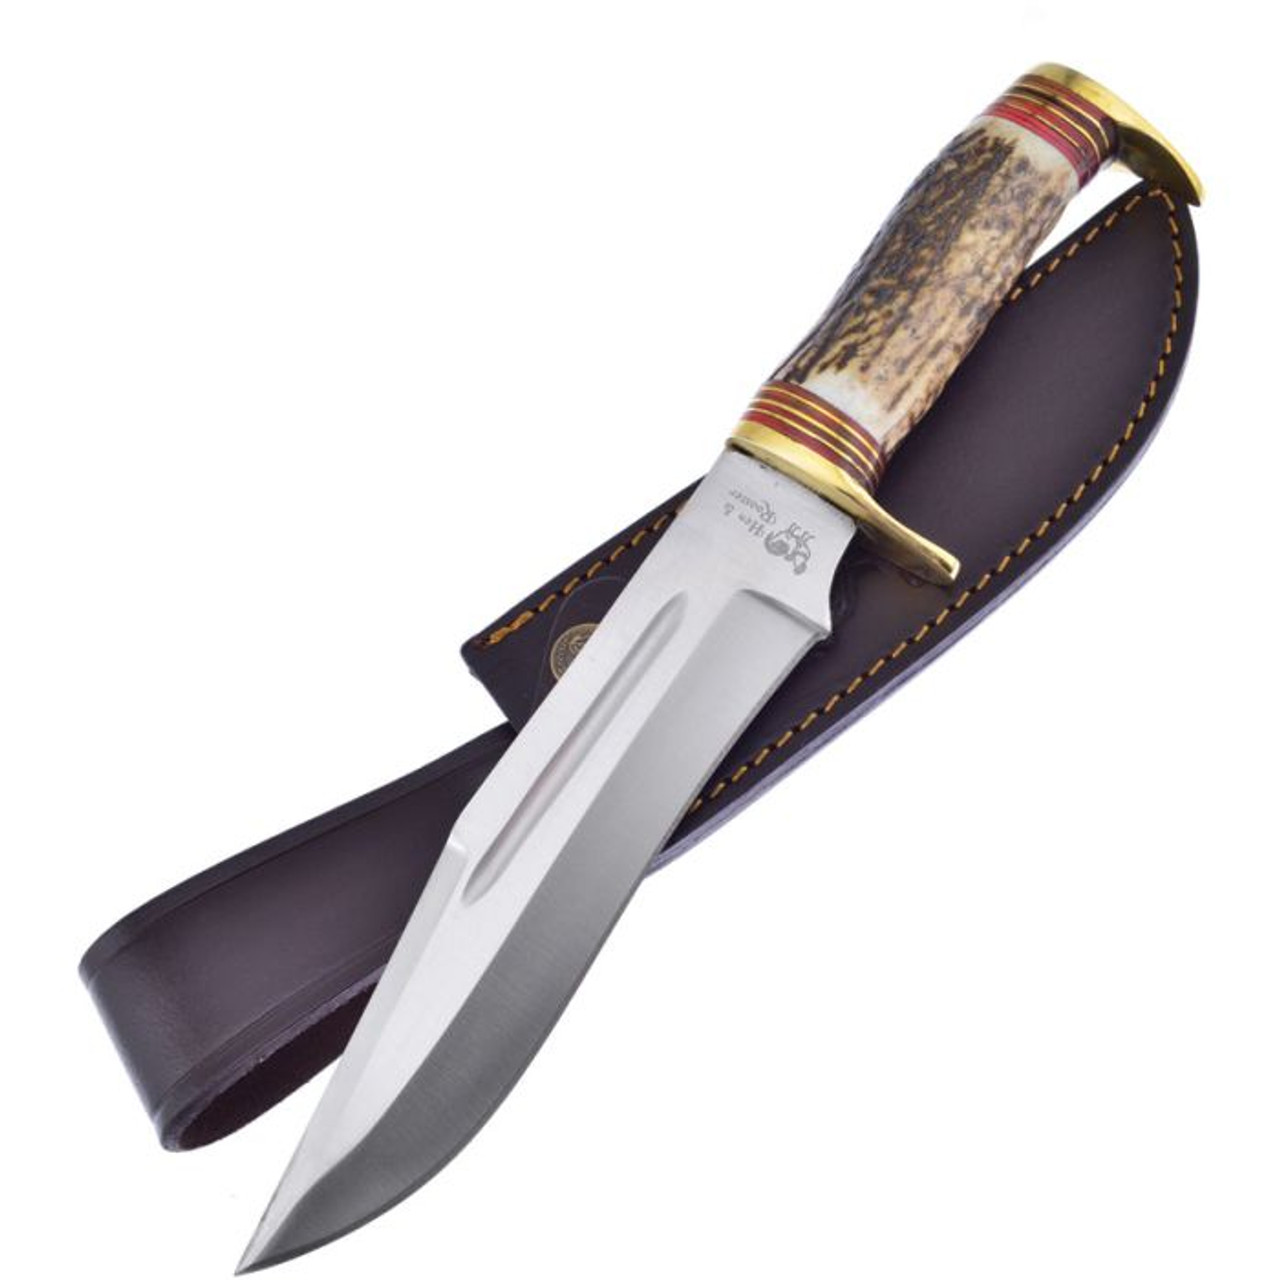 Hen & Rooster Fixed Blade (HR185) 7.25" 440 SS Satin Clip Point Plain Blade, Deer Stag Handle with Brass Guard and Pummel, Brown Leather Belt Sheath